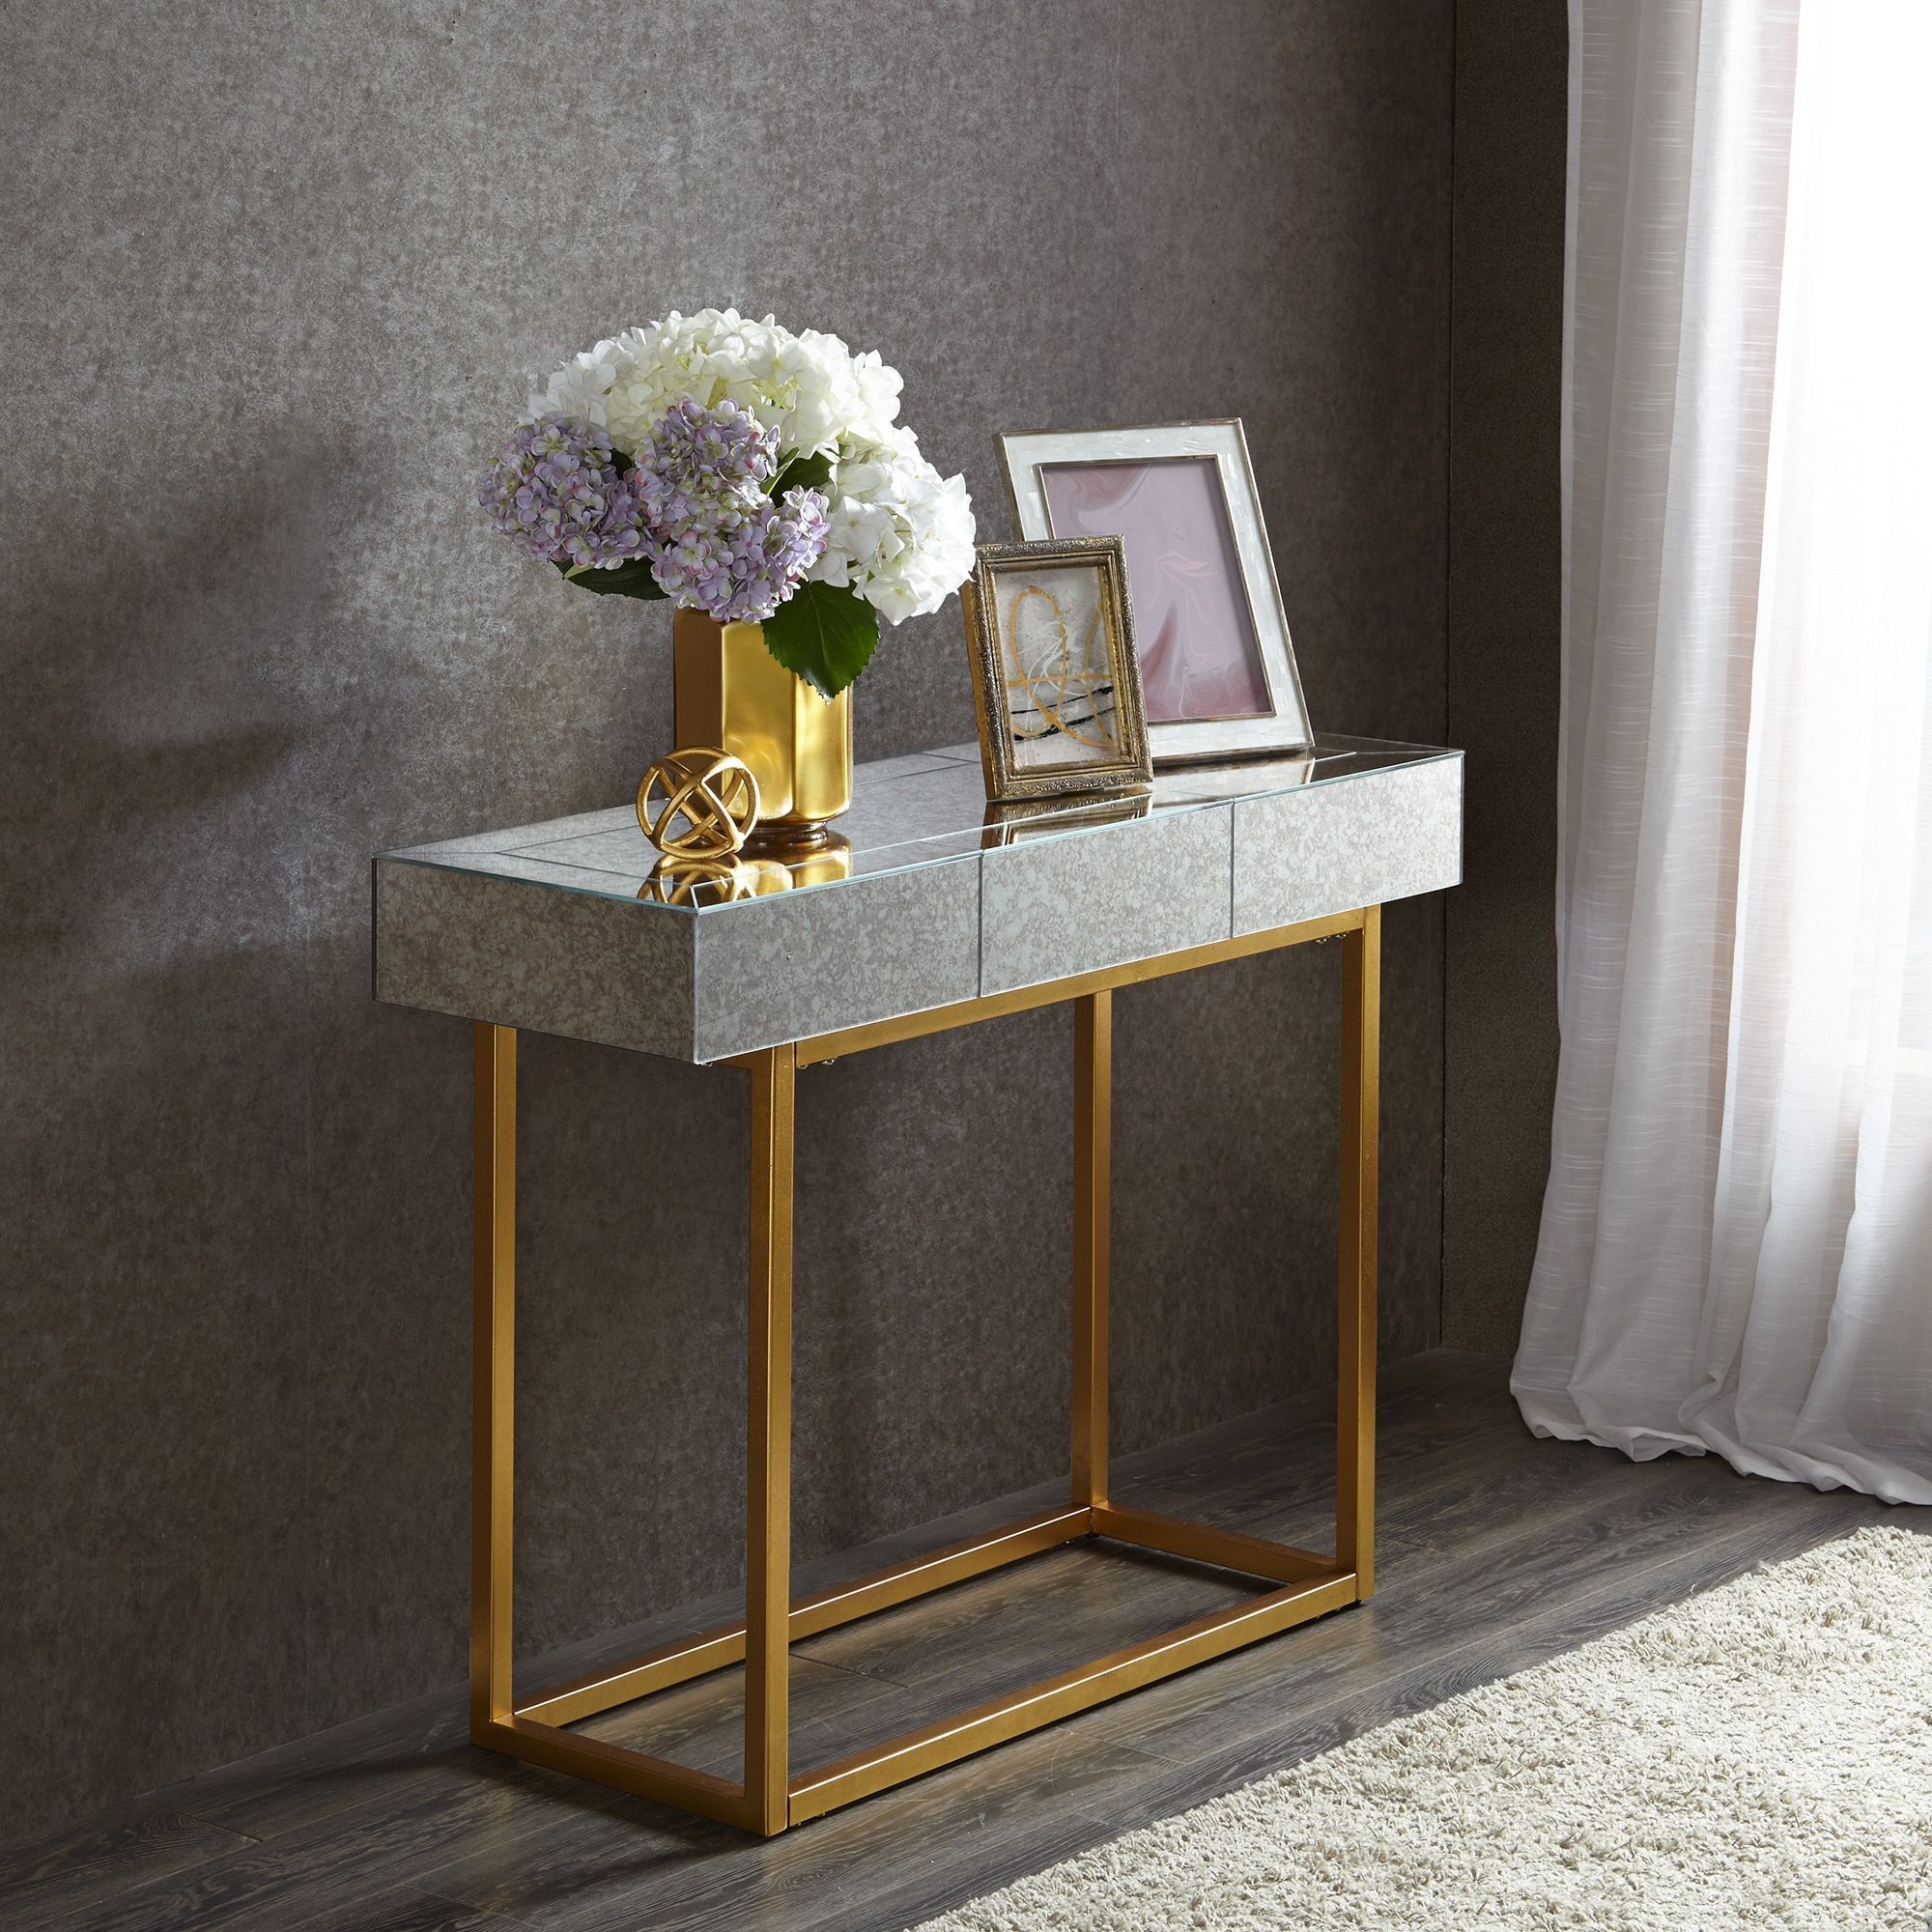 Sofa For Most Up To Date Square Black And Brushed Gold Console Tables (View 7 of 10)